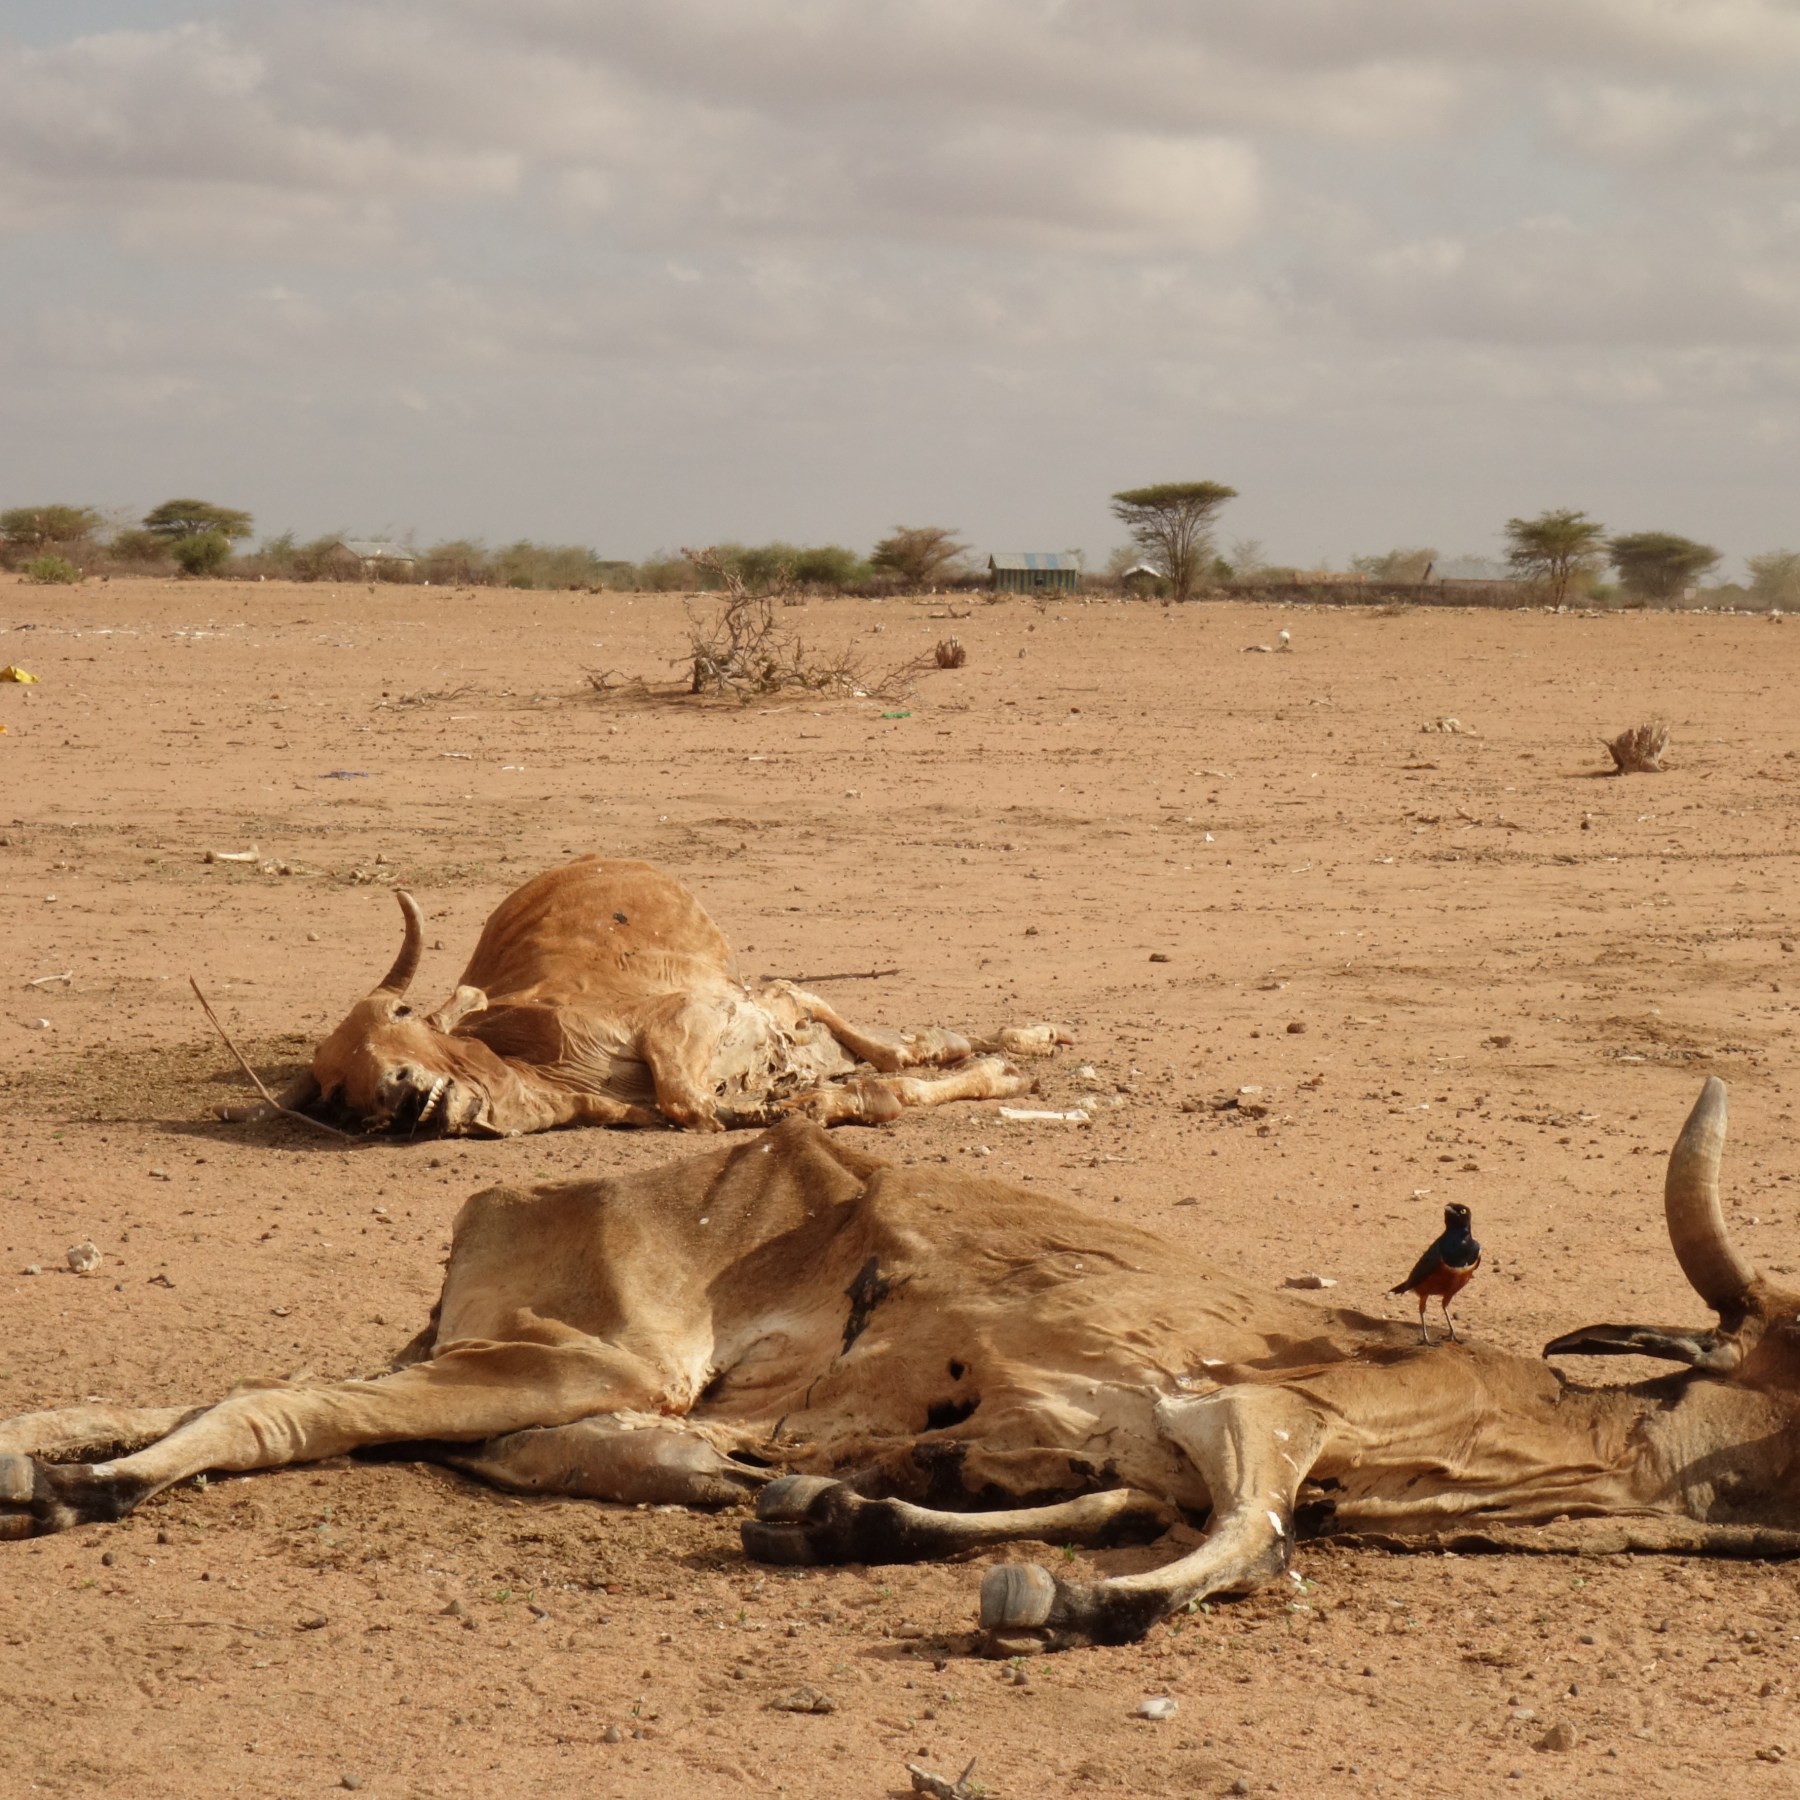 We will all die': In Kenya, prolonged drought takes heavy toll | Climate  Crisis News | Al Jazeera